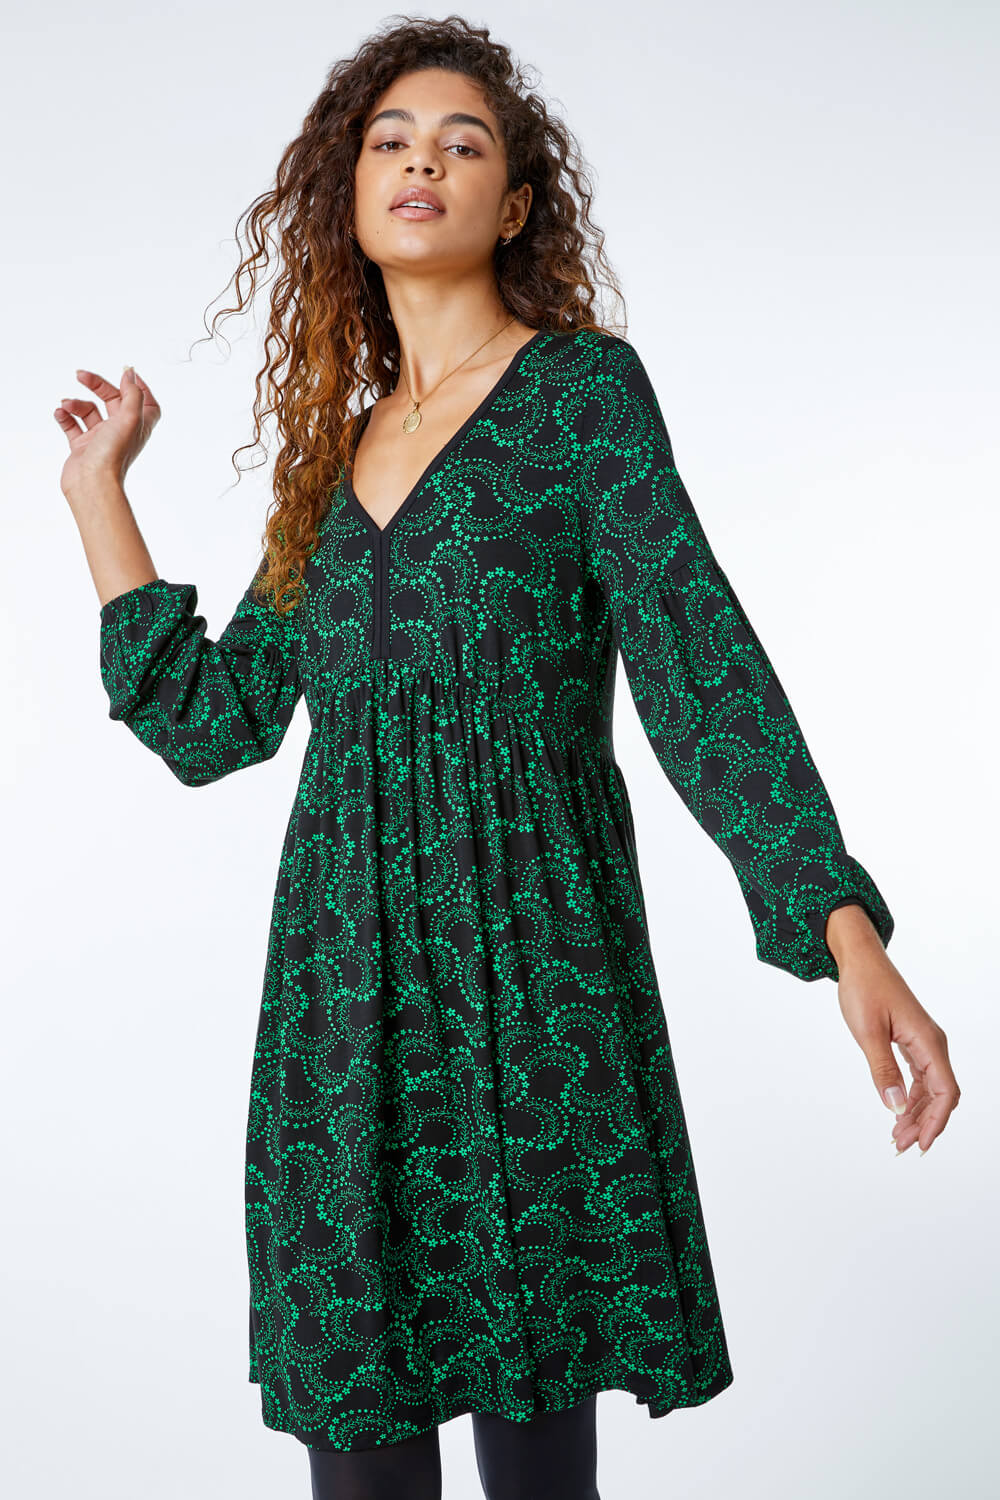 Green Abstract Spiral Print Dress, Image 2 of 5